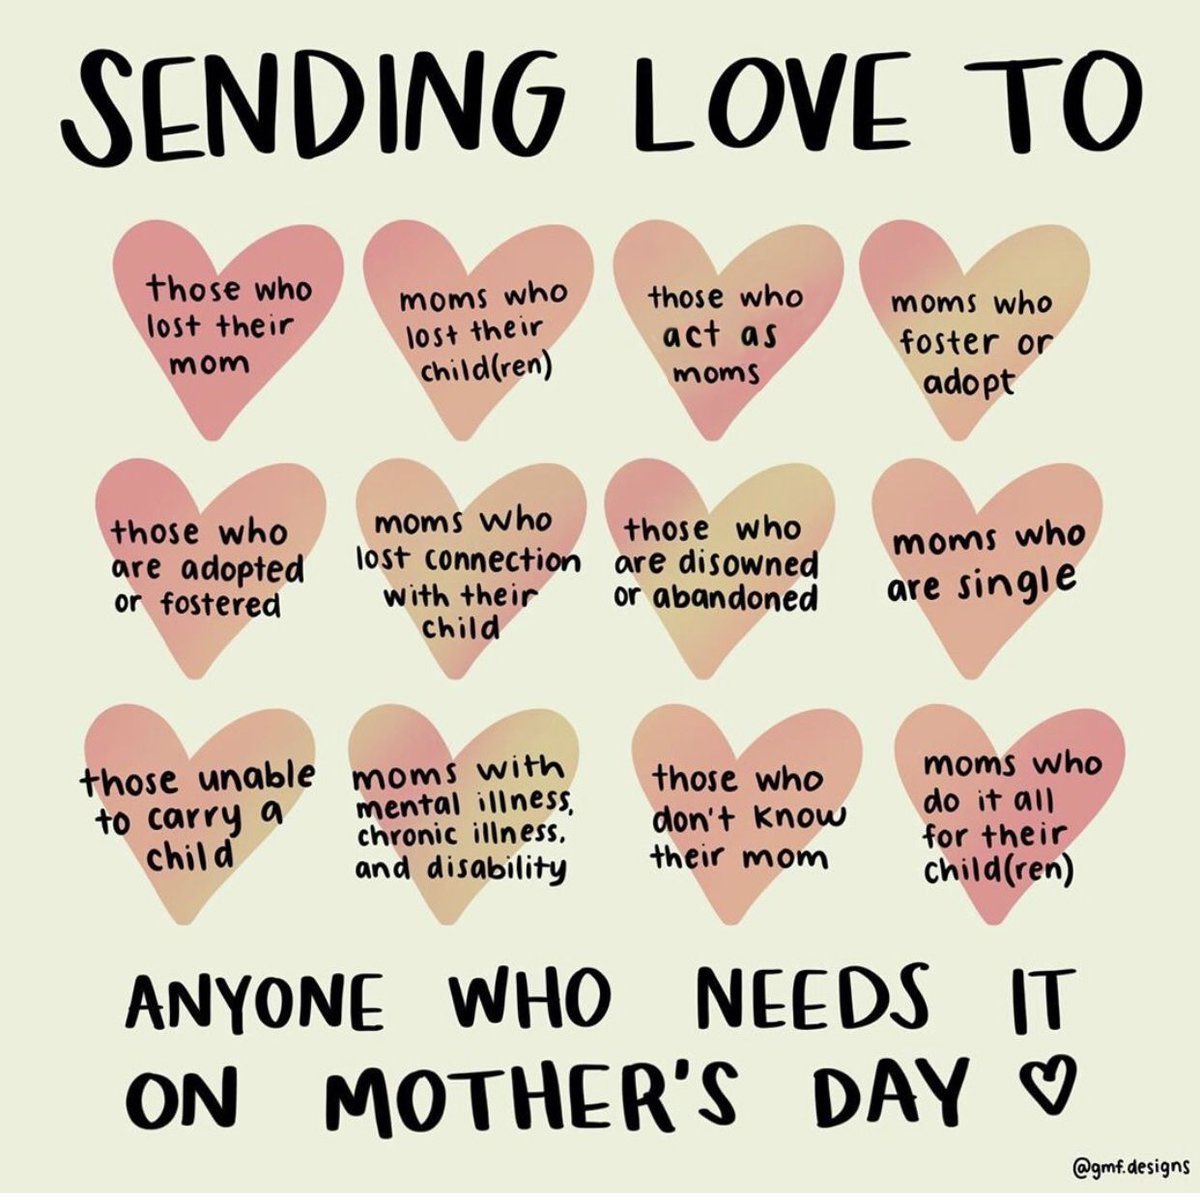 We can never assume we know anyone’s circumstances. Mother’s Day can be fulfilling & joyful day for some, but really rough for others. Please be kind to yourself and others. 💖💐